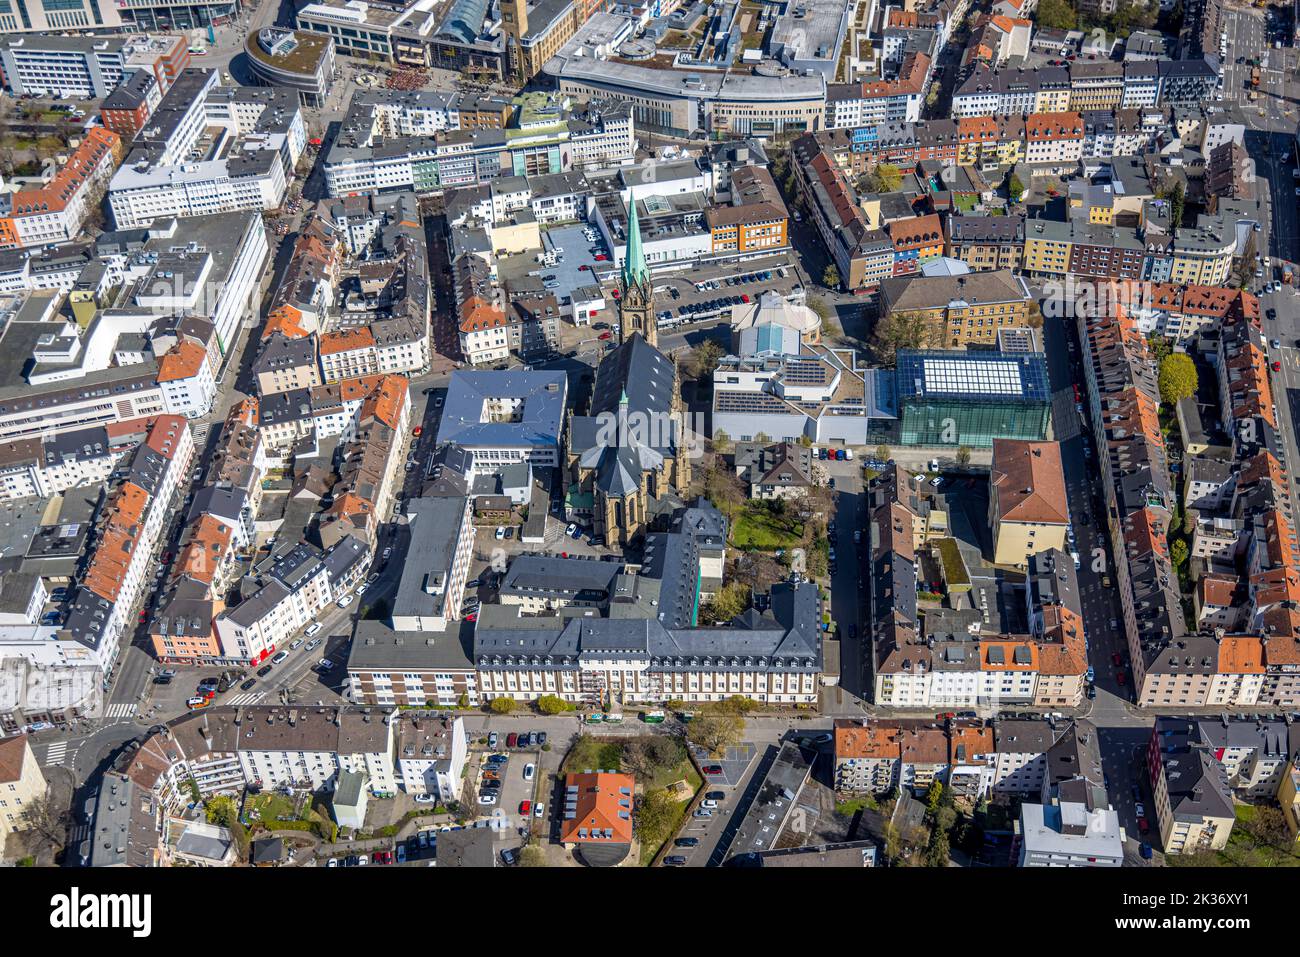 Aerial view, city center with catholic hospital Hagen, St. Mary's church, Osthaus museum, middle town, Hagen, Ruhr area, North Rhine-Westphalia, Germa Stock Photo